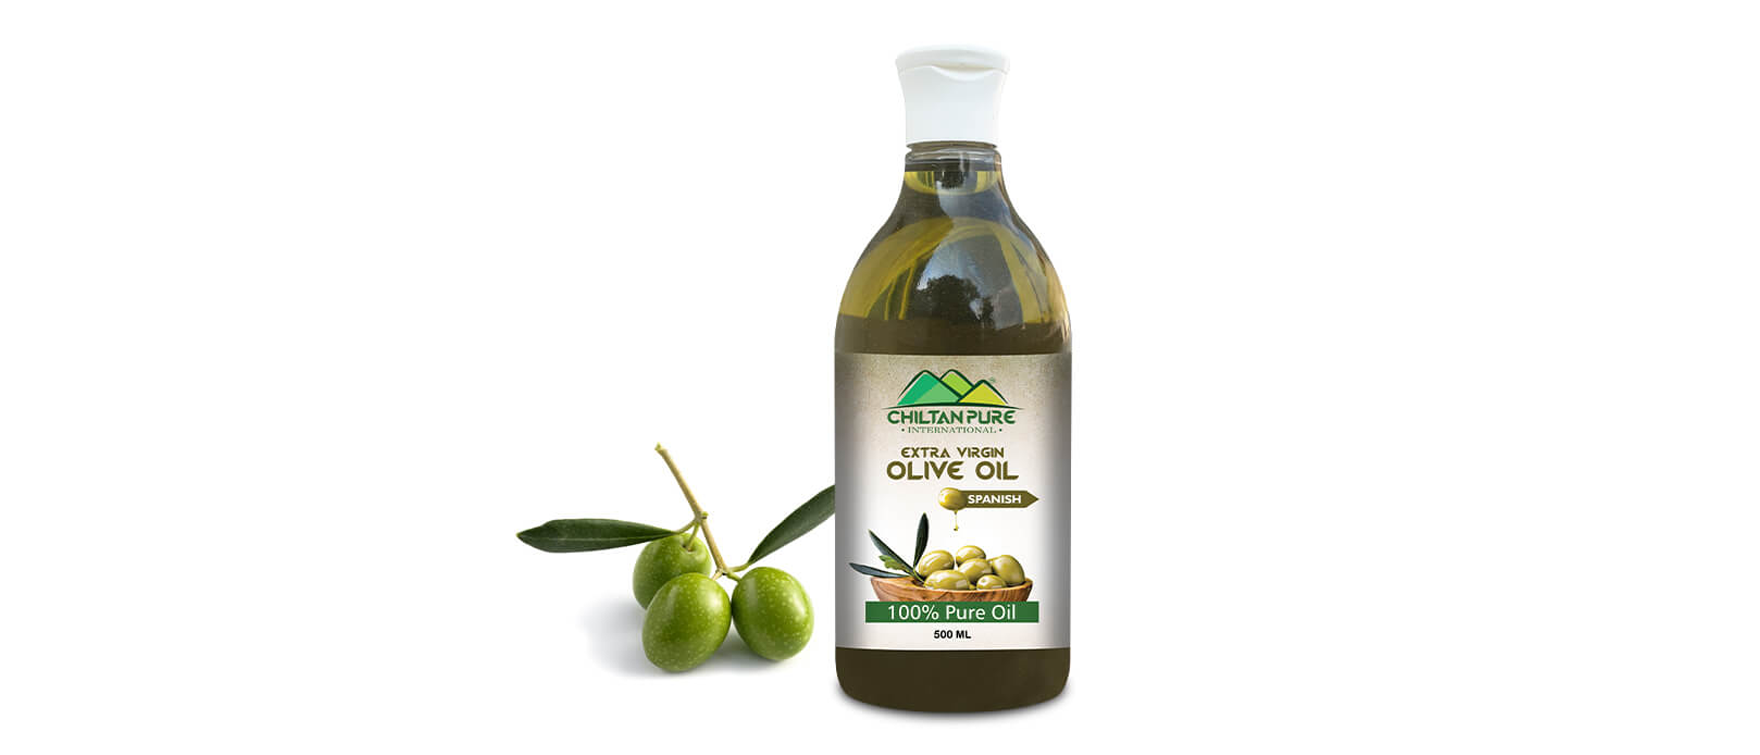 5. Best Healthy Option: Olive Oil